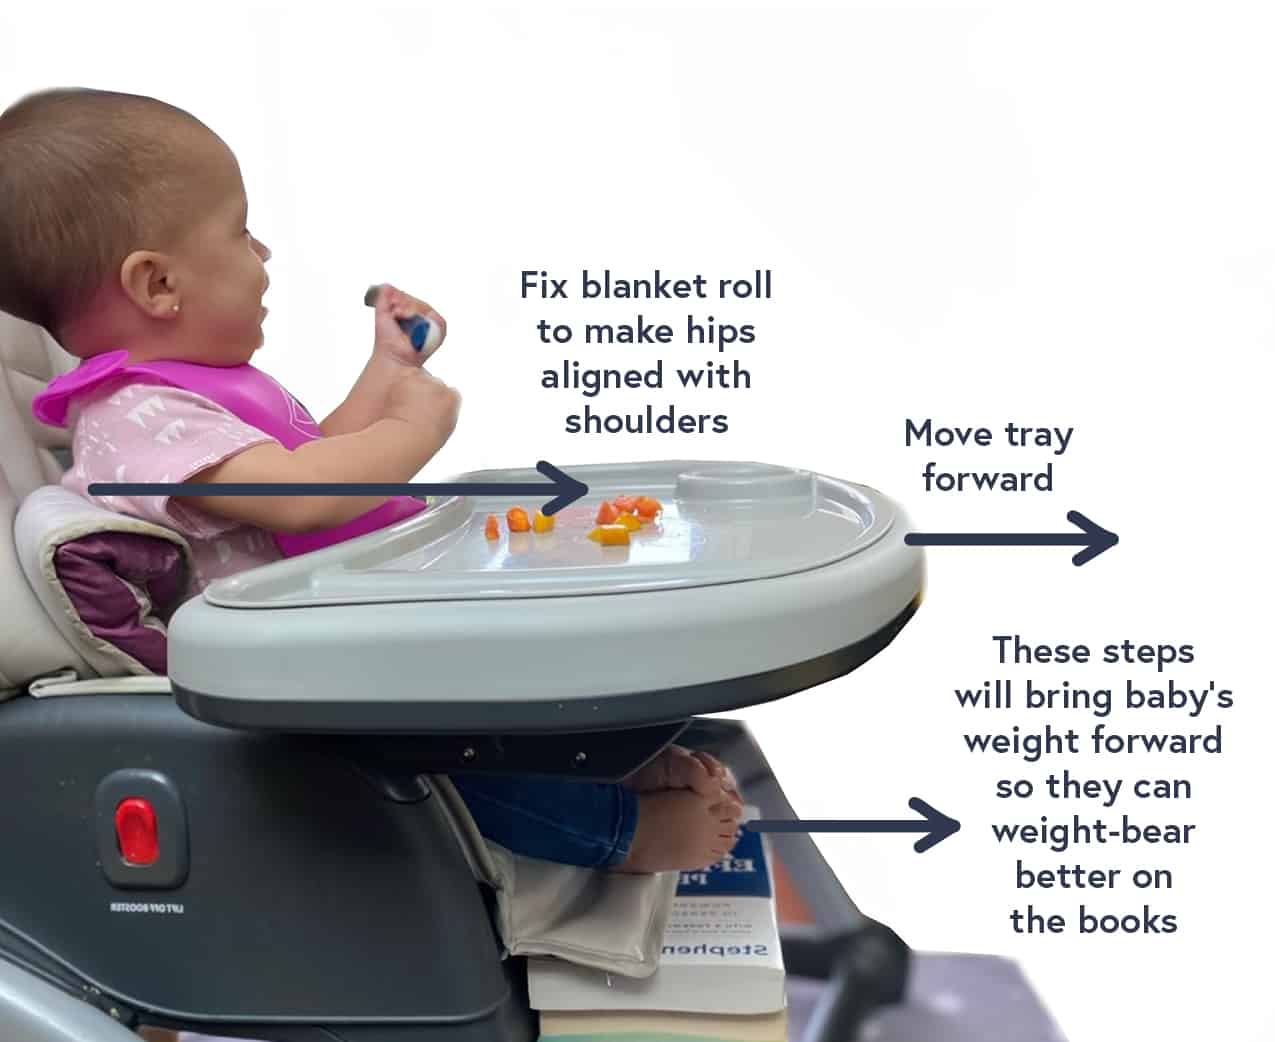 Infant Baby Health Care Booster Seat Dinning Chair Fordable For Toddler Baby  Multifunctional kids product